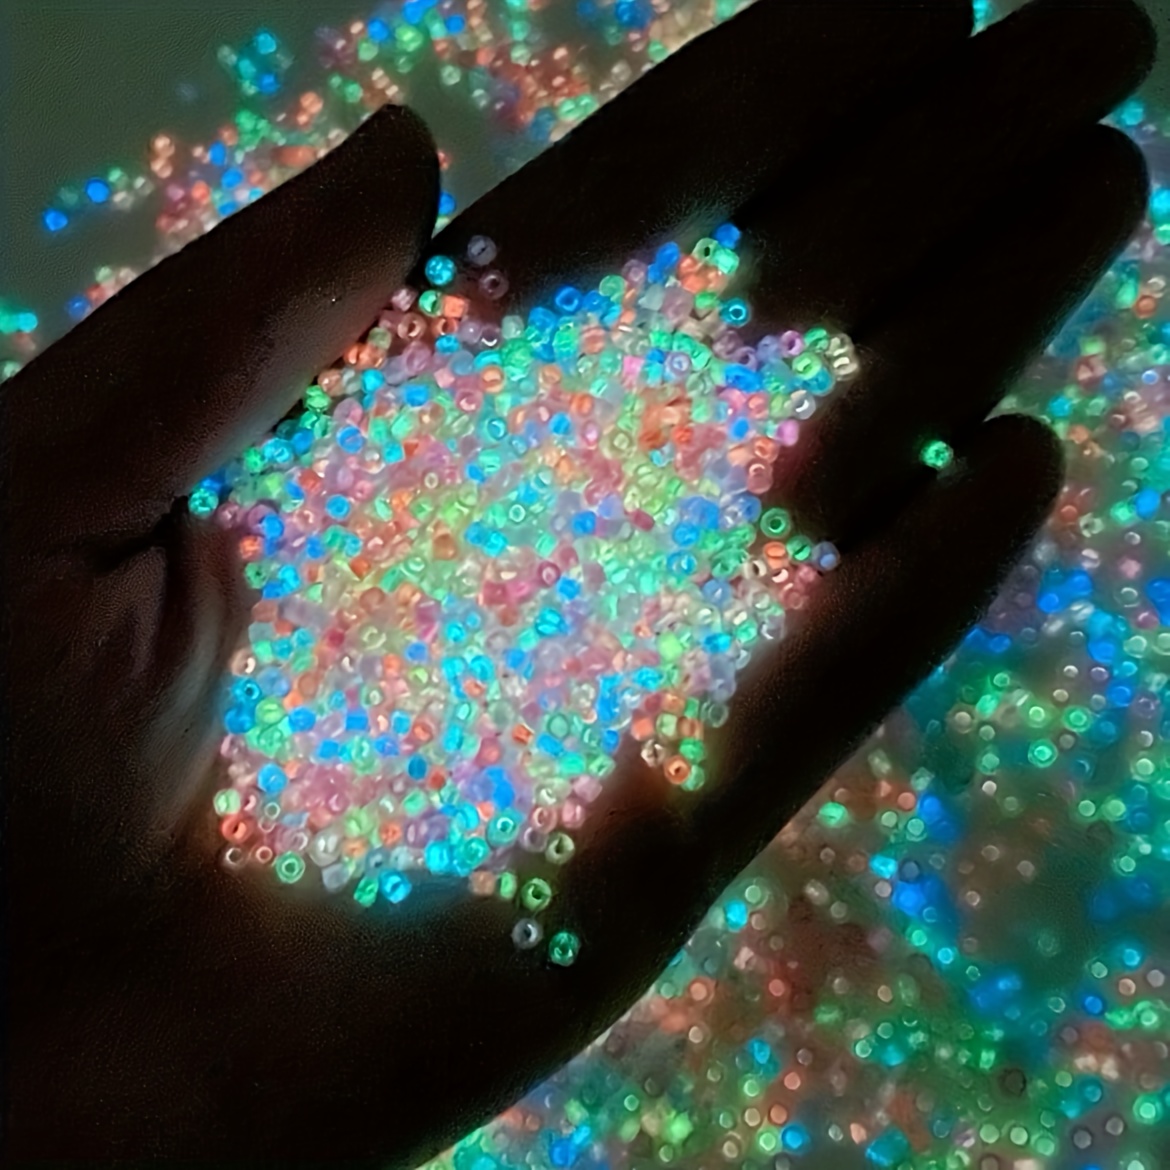 

20g/100g 3mm Luminous Transparent Glass Rice Beads For Jewelry Making Diy Fashion Bracelet Necklace Ring Handmade Craft Supplies, Glow In The Dark, Does Not Glow Under Normal Light 0.71oz/3.53oz